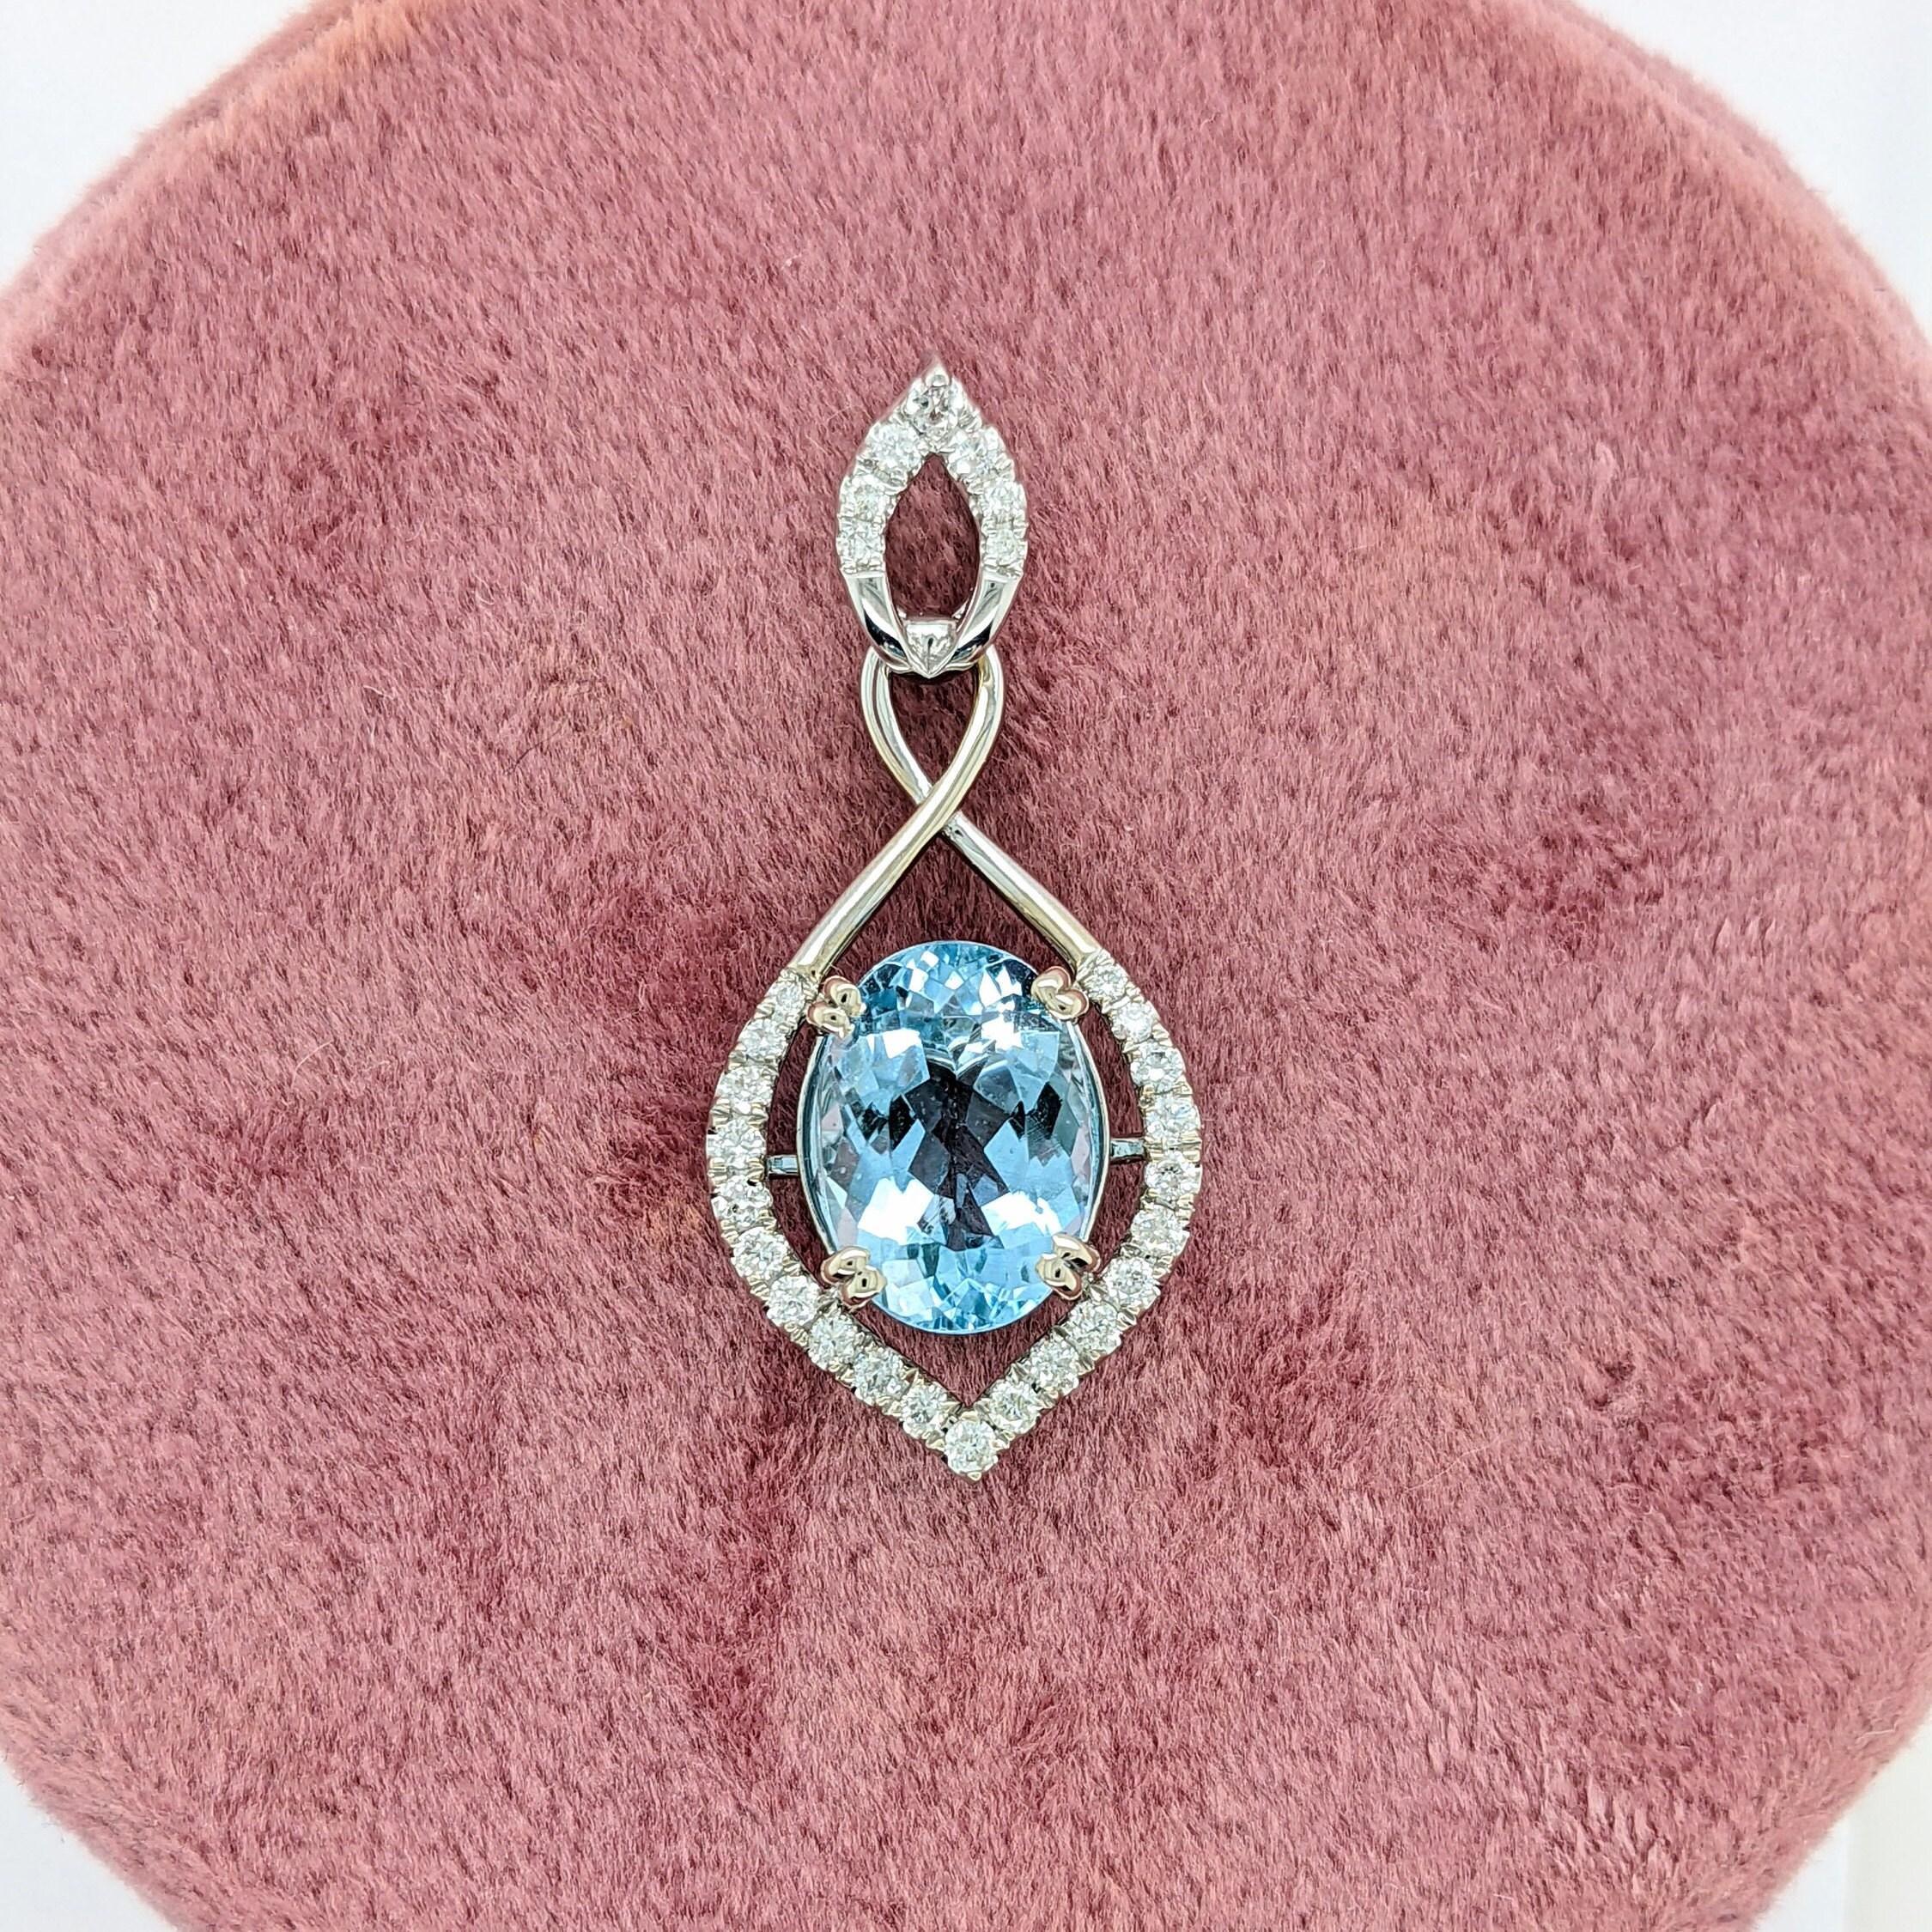 This beautiful pendant features a stunning 3ct sea blue oval aquamarine with natural earth-mined diamonds in solid 14k gold. A lovely design for your daily wear! This pendant also makes a beautiful March birthstone pendant for your loved